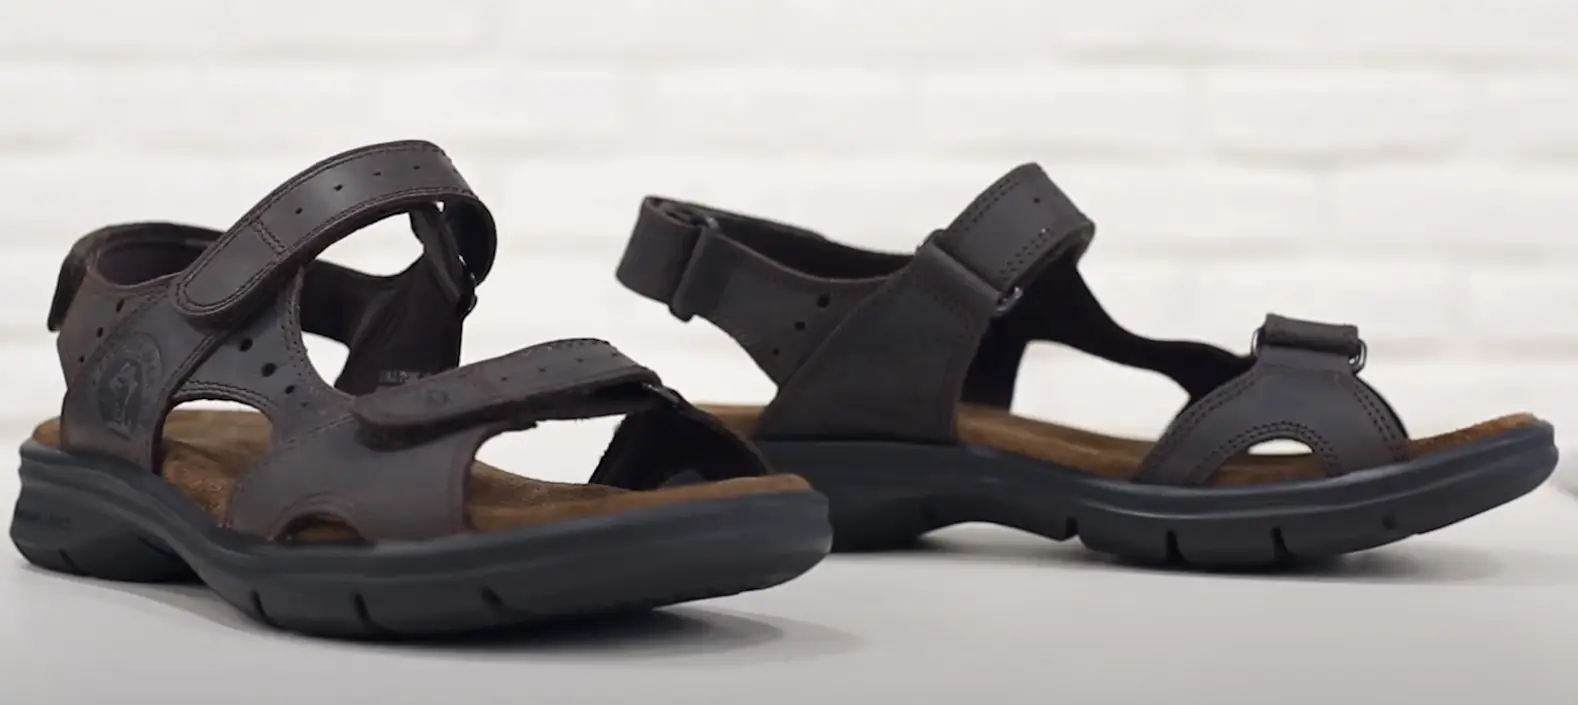 How to Clean Leather Sandals Thoroughly